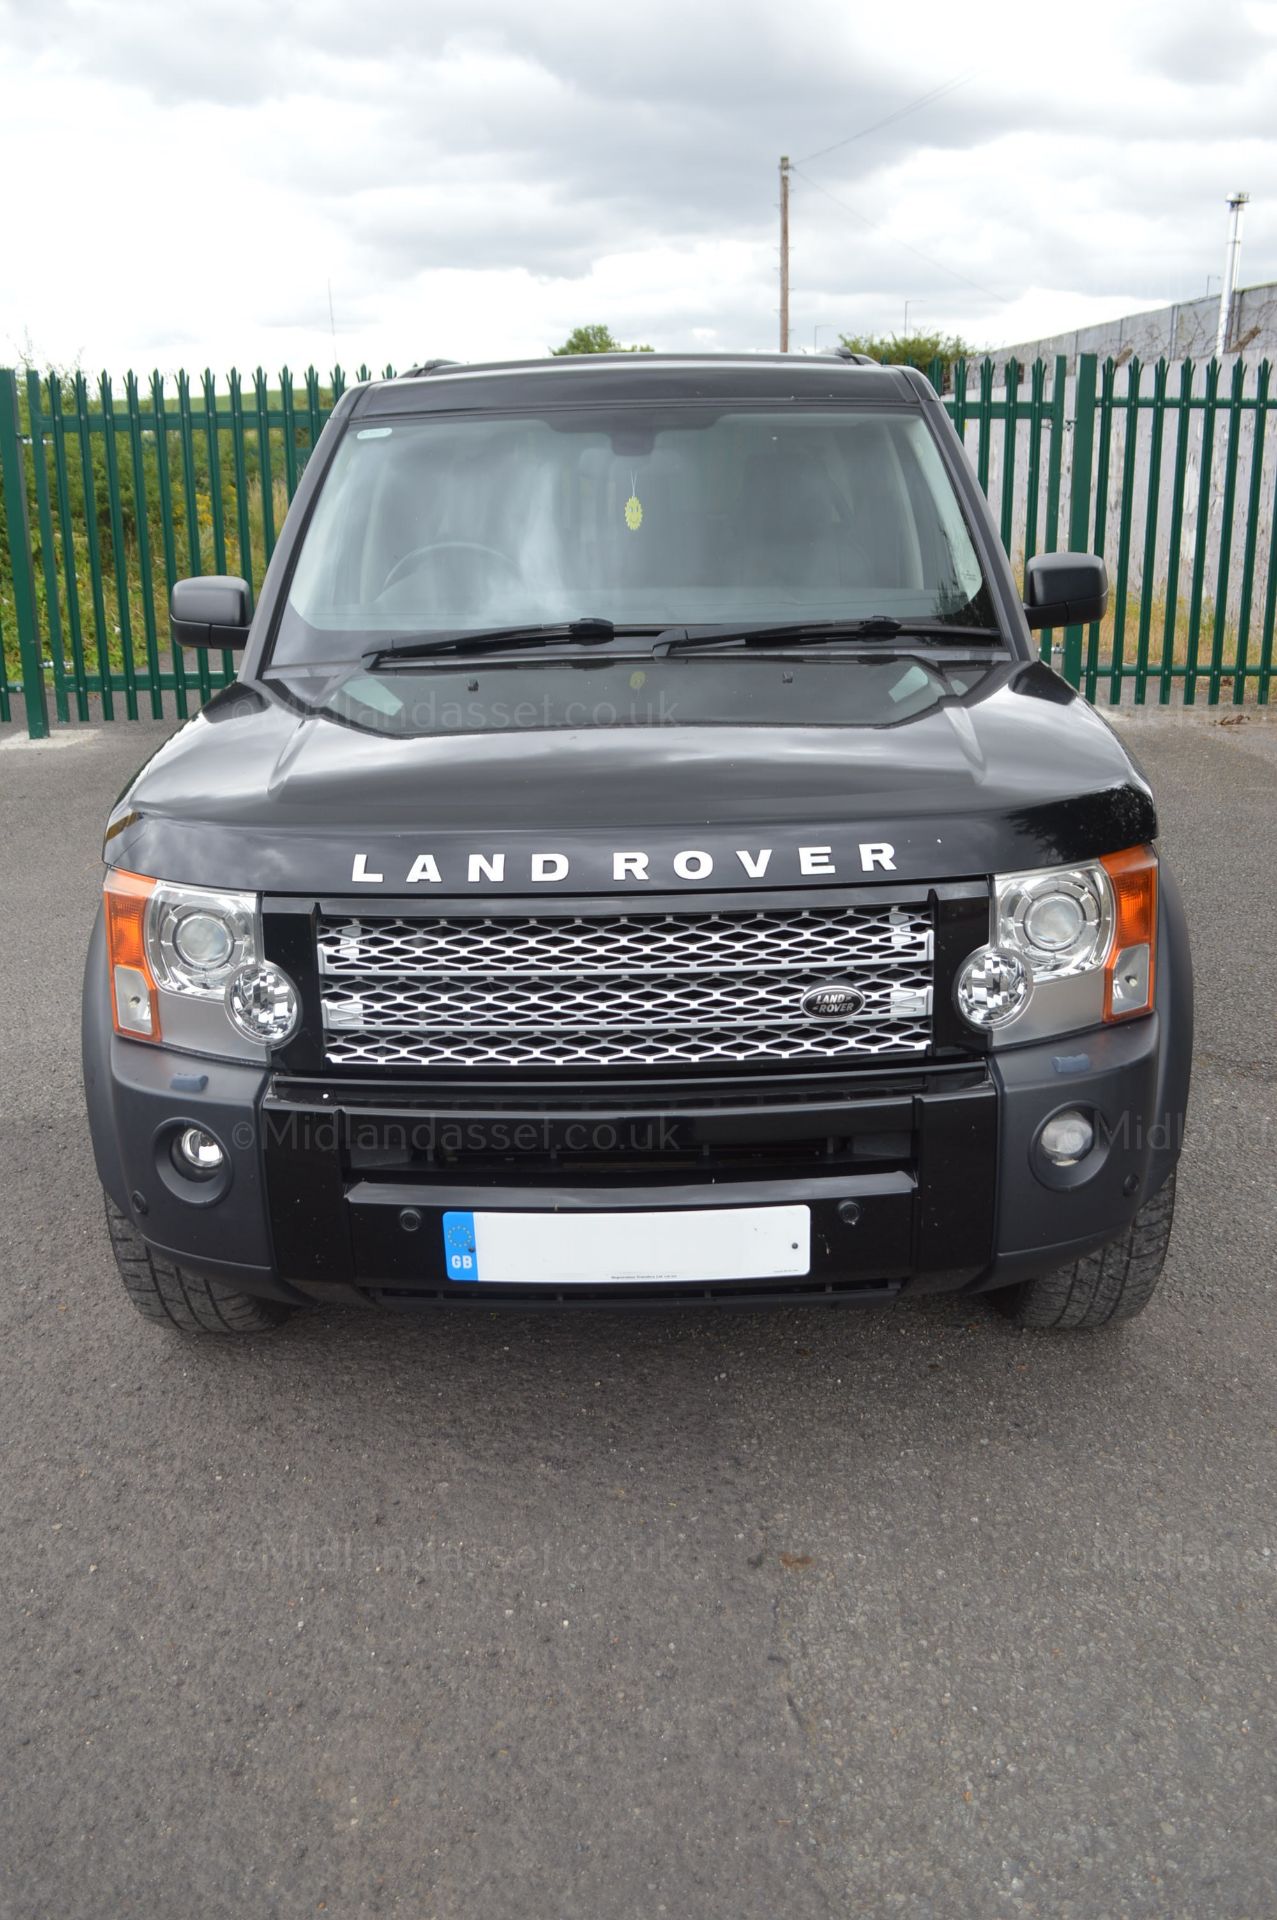 2006/56 REG LAND ROVER DISCOVERY 3 TDV6 HSE AUTO 7 SEAT SERVICE HISTORY - Image 2 of 15